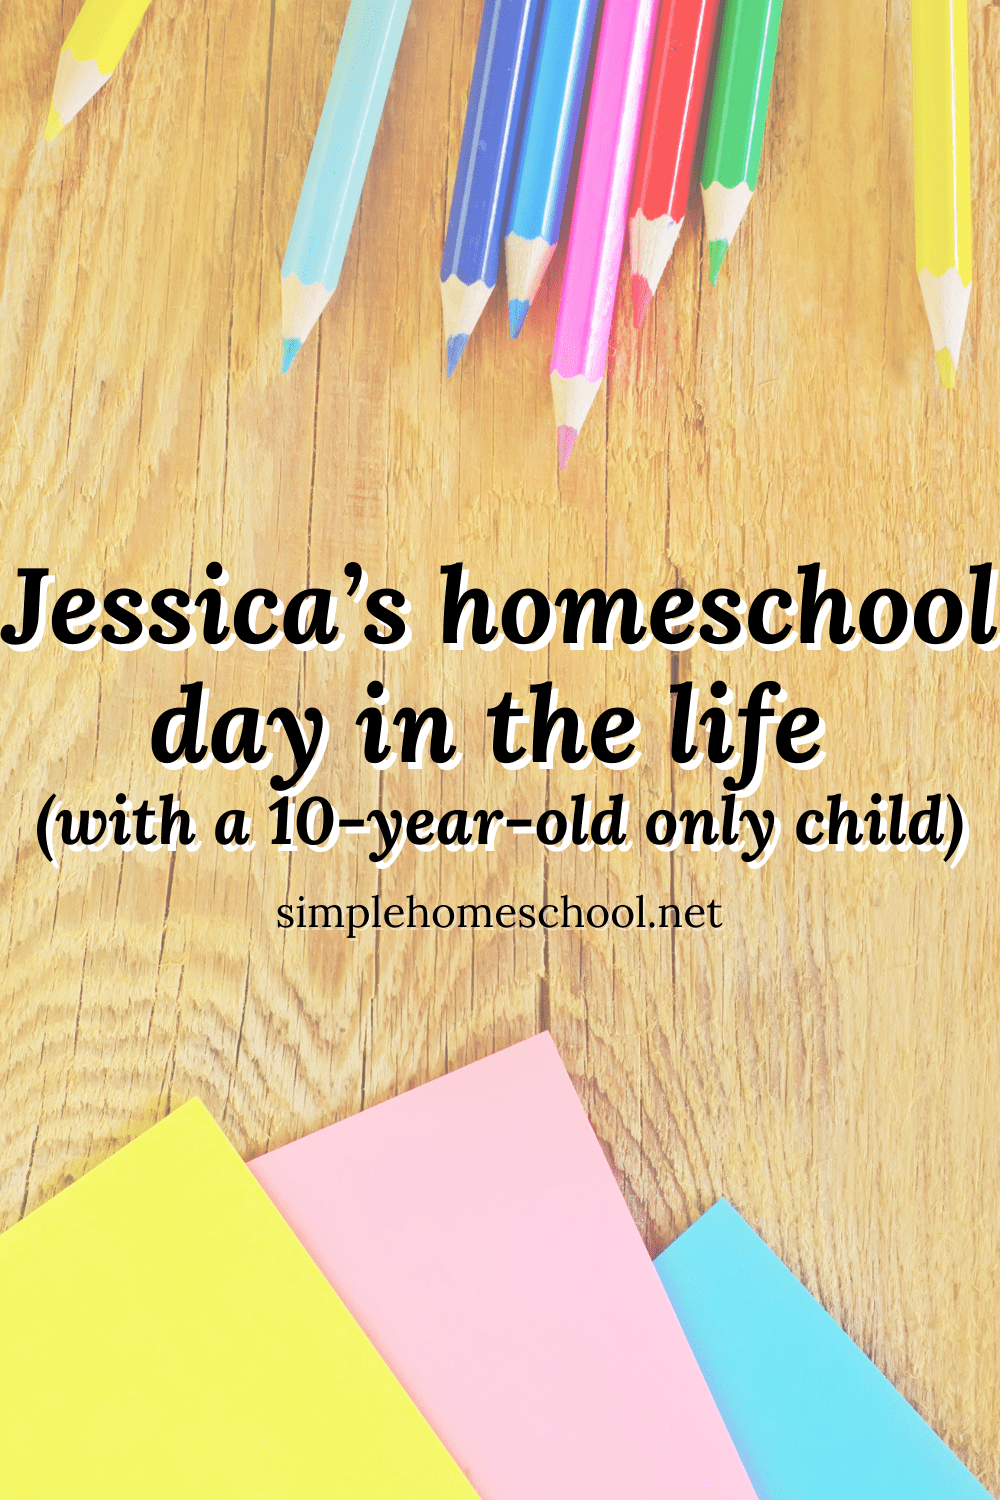 Jessica’s homeschool day in the life 